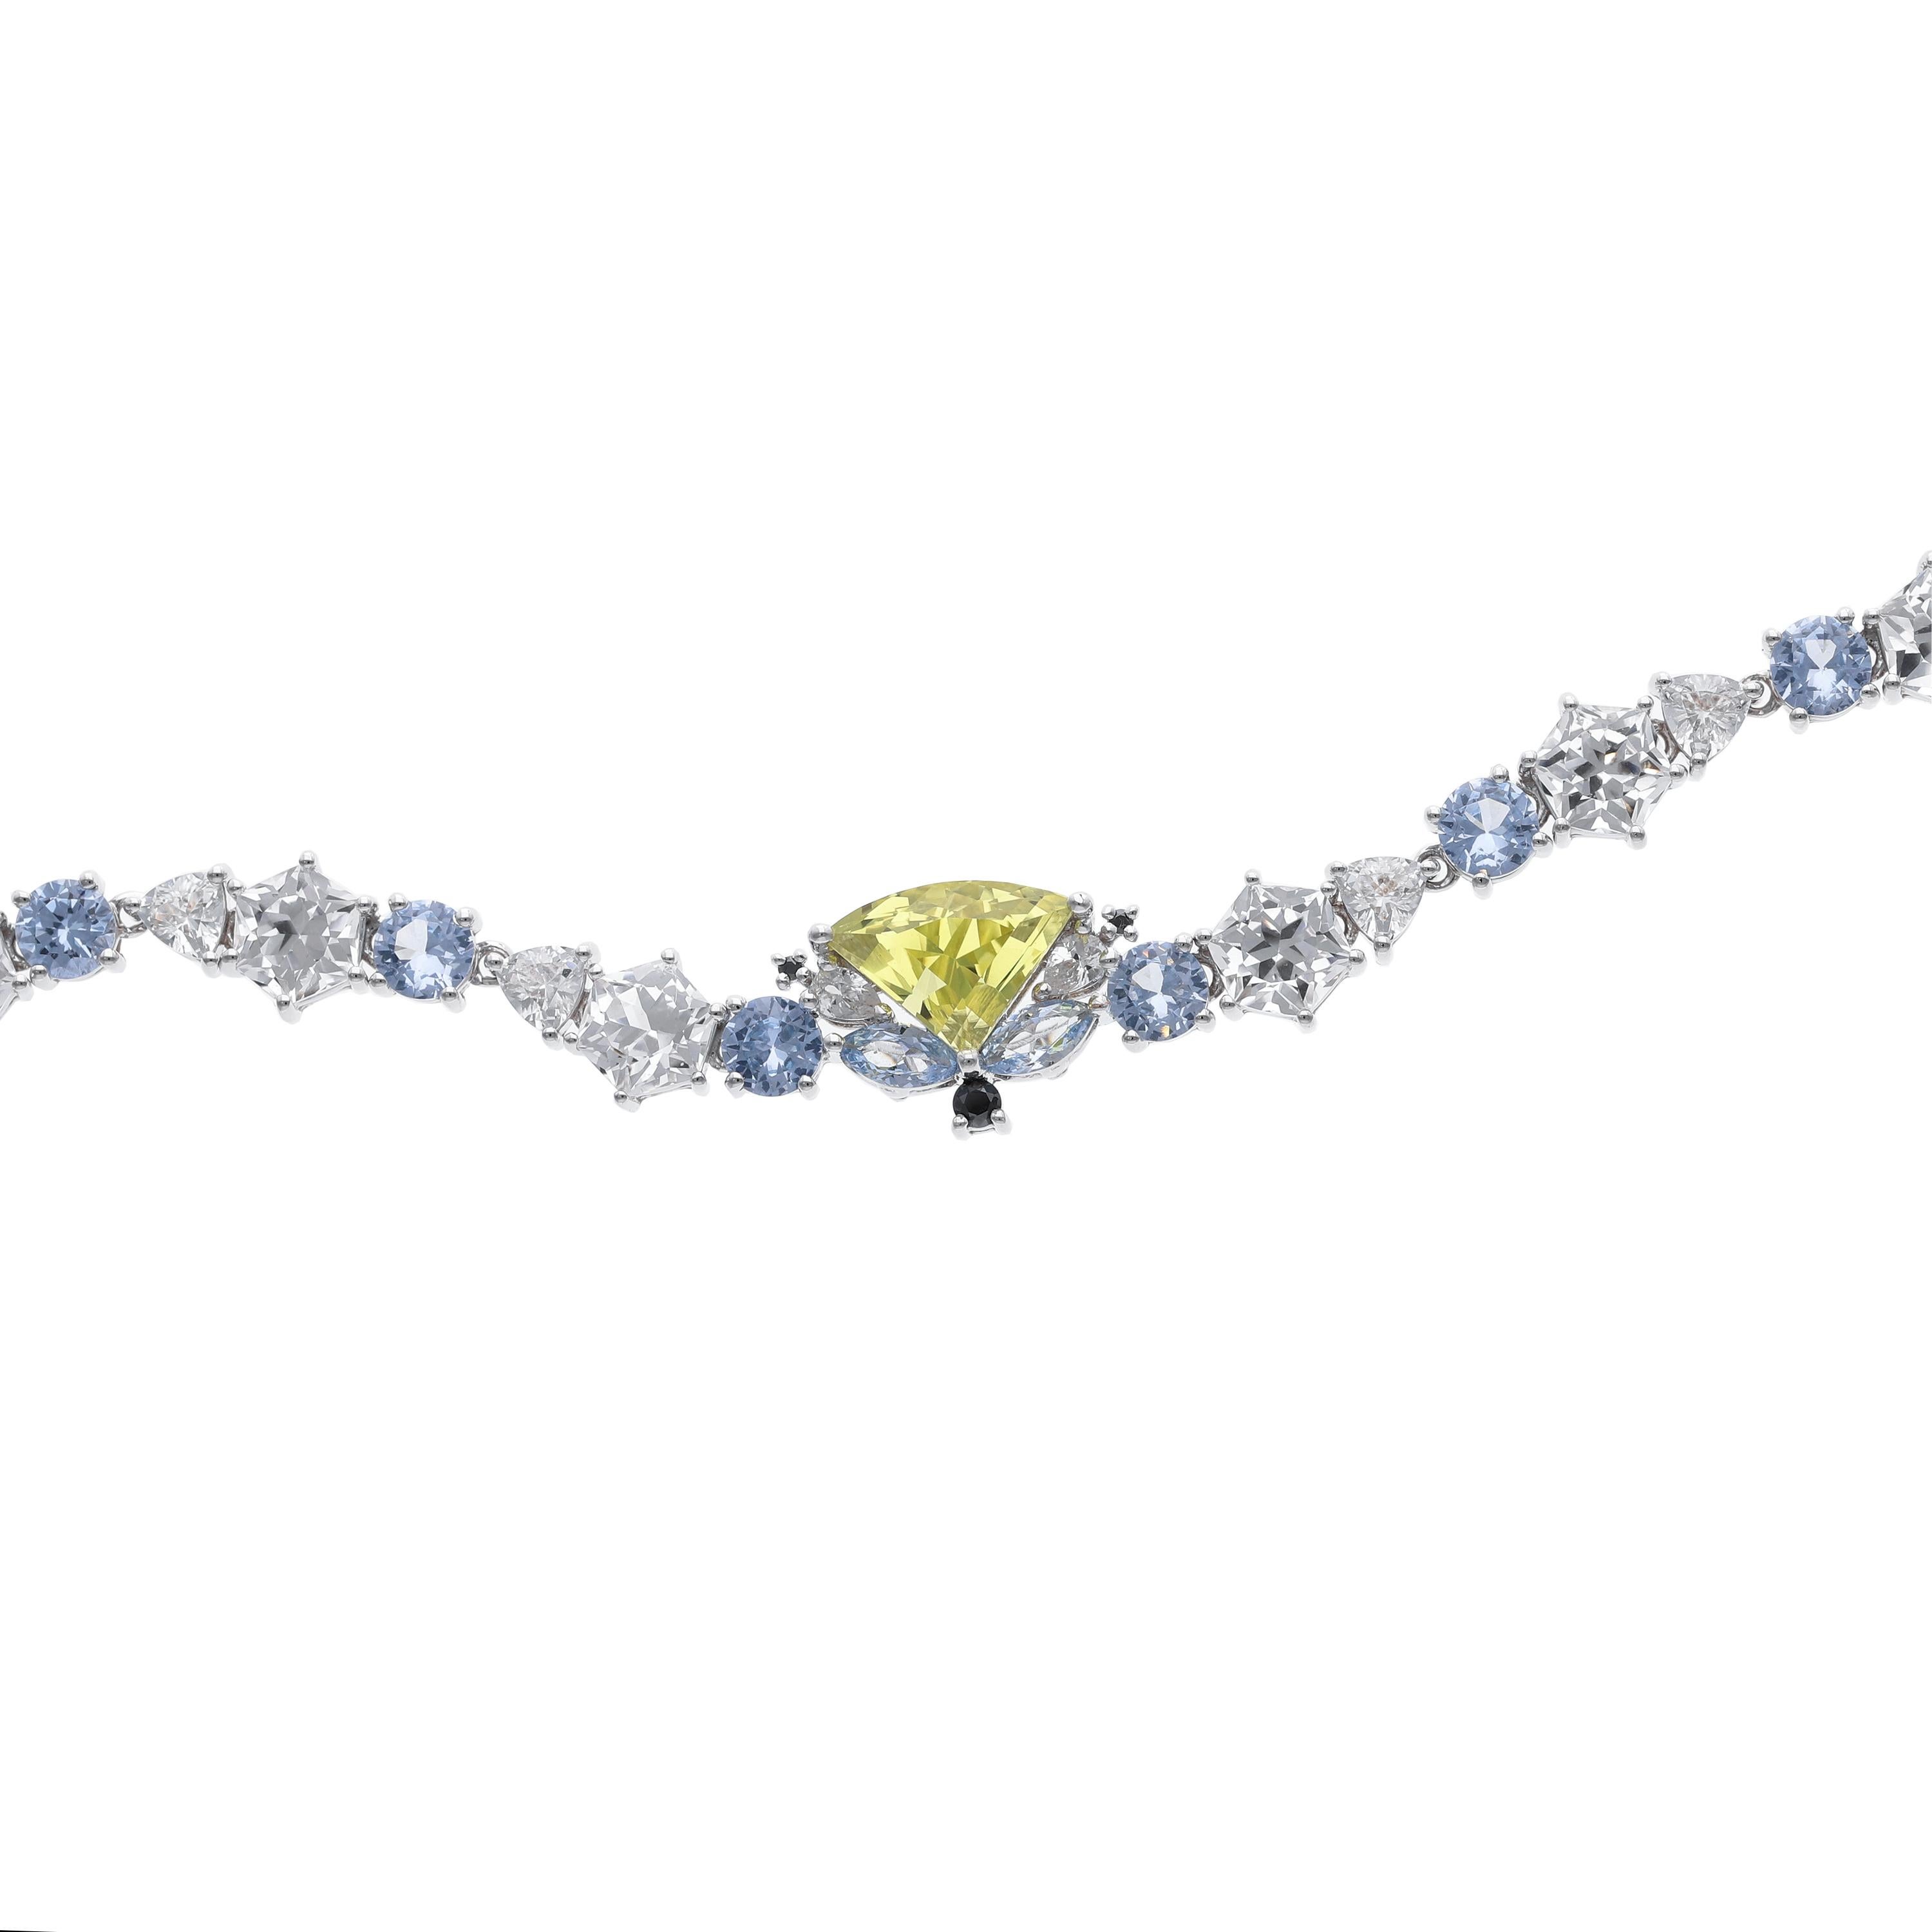 Named after the Greek goddess of the ocean, Amphitrite, this choker truly befits a mermaid. The centrepiece of the choker features an incredibly rare fan shaped yellow sapphire, reminiscent of Venus’s scallop shell in The Birth of Venus. The fan is